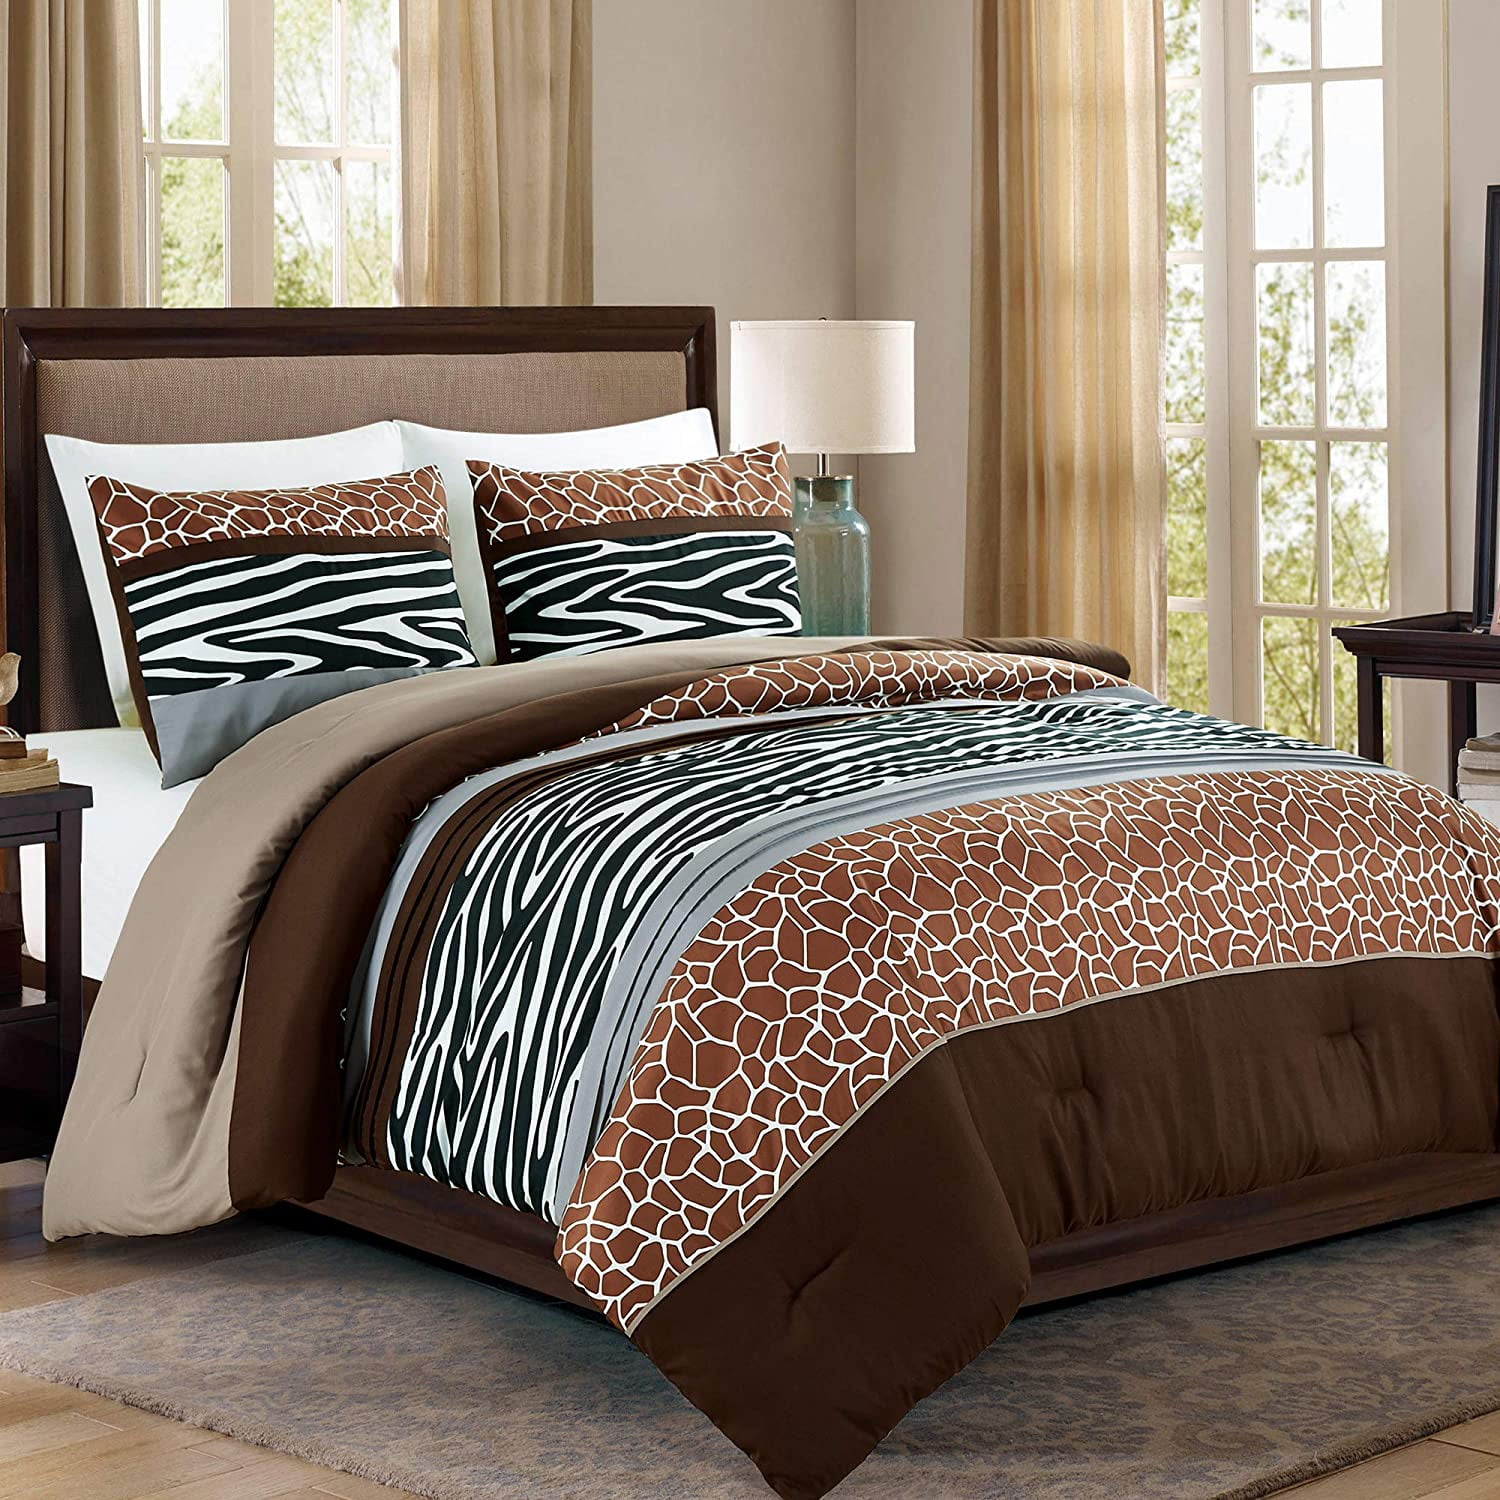 All Seasons Safari Printed Coverlet Bed Top Dressing Bedding Quilted Bedspread 